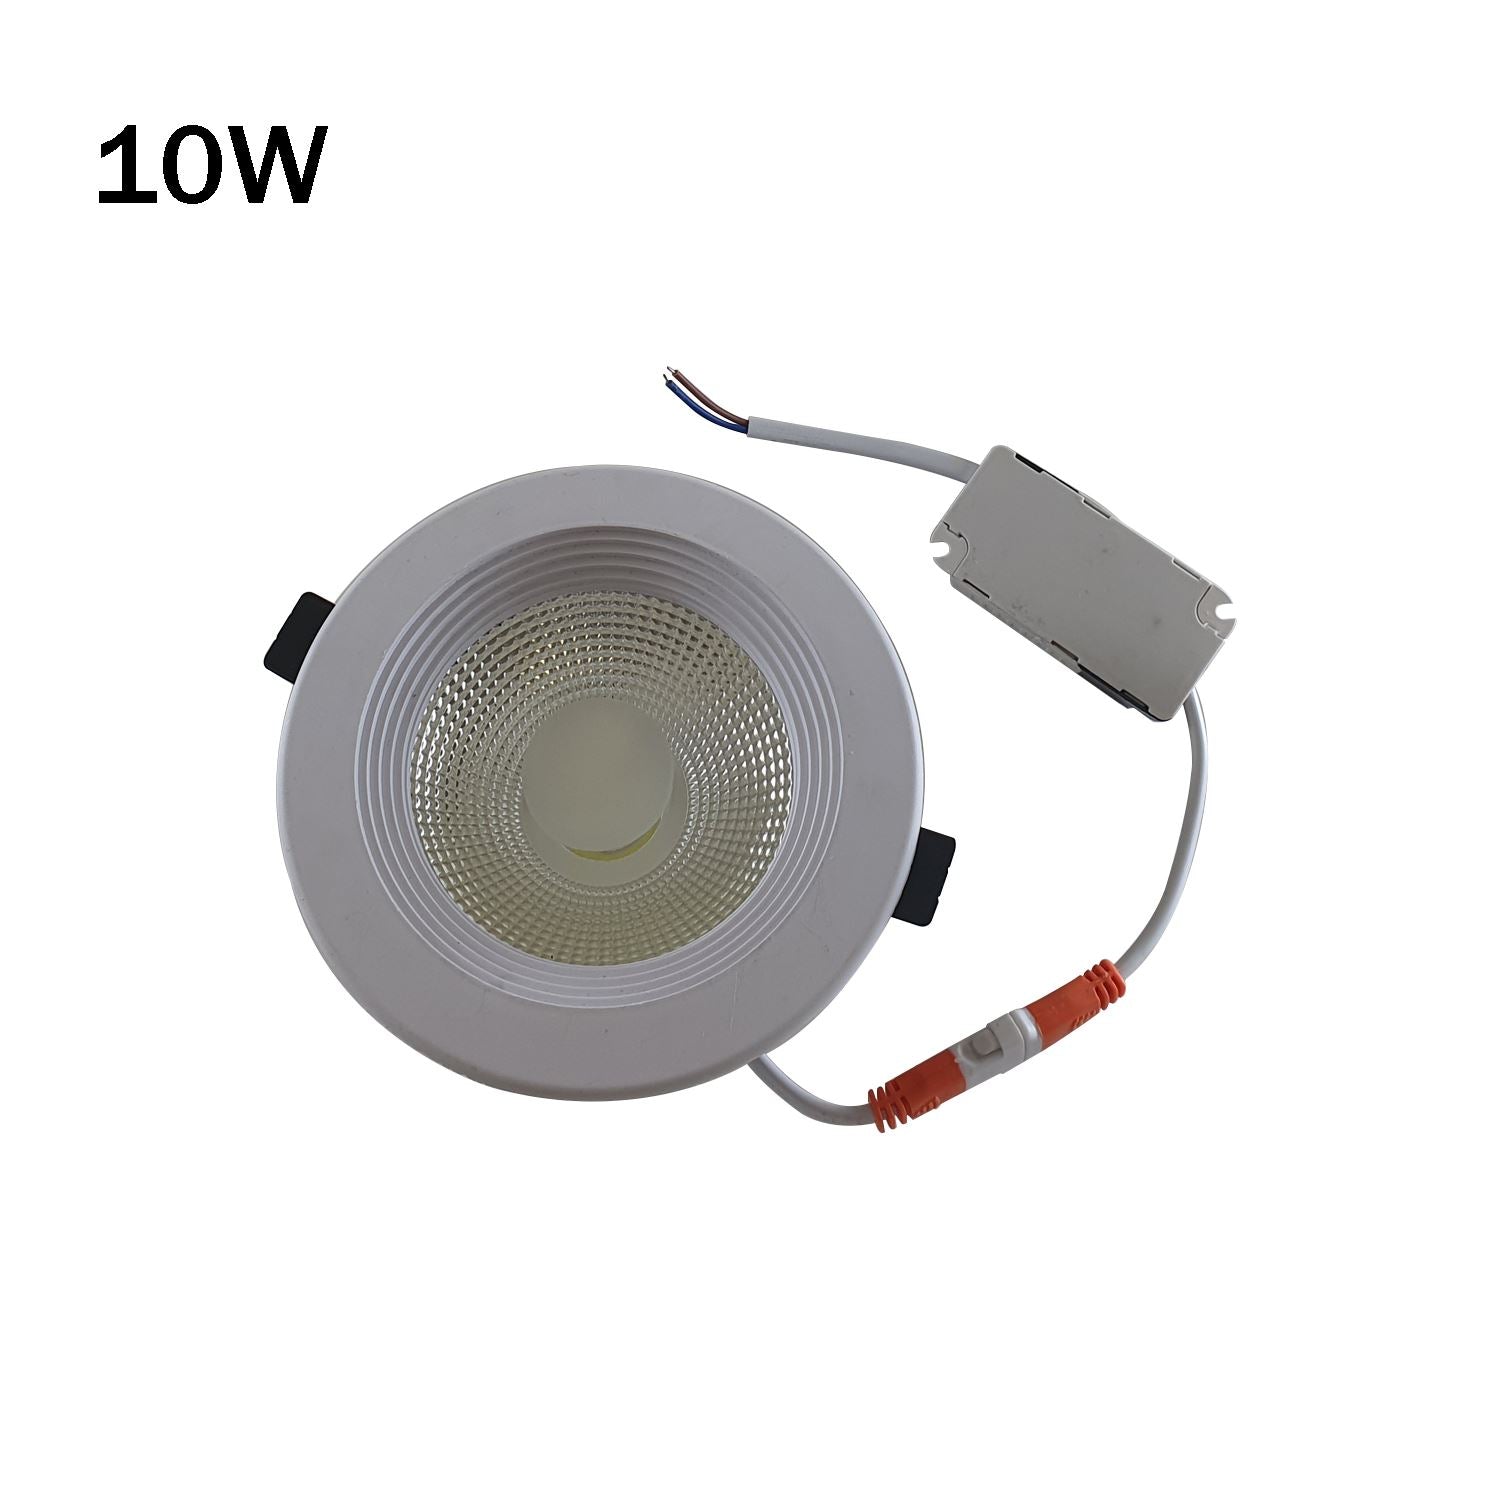 LED Round Recessed Indoor Ceiling Panel down Light Cool White For Hotel, Office, Library, Cellar~1311 - LEDSone UK Ltd